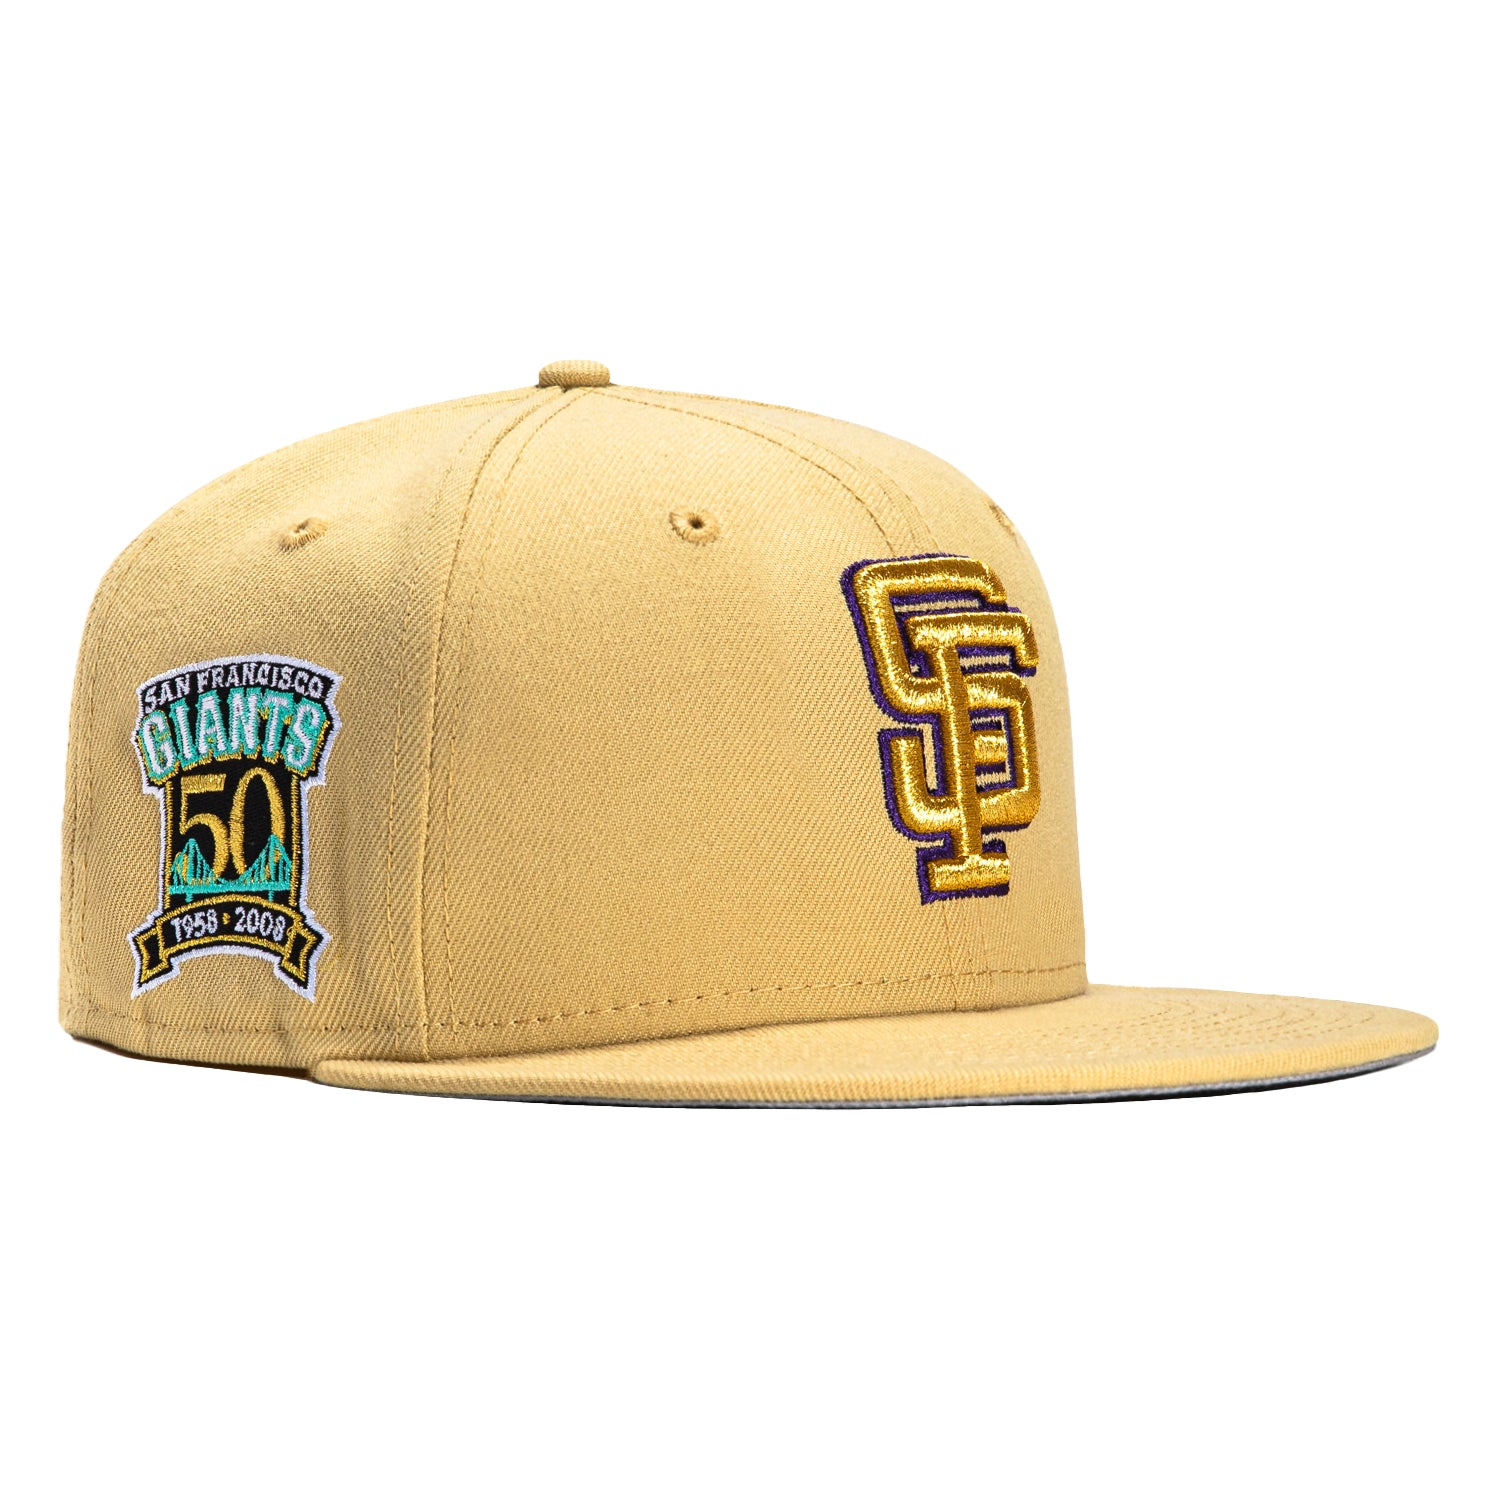 New Era 59FIFTY Jae Tips Forever San Francisco Giants Battle of The Bay Patch Hat- Tan, Red Tan/Red / 6 7/8